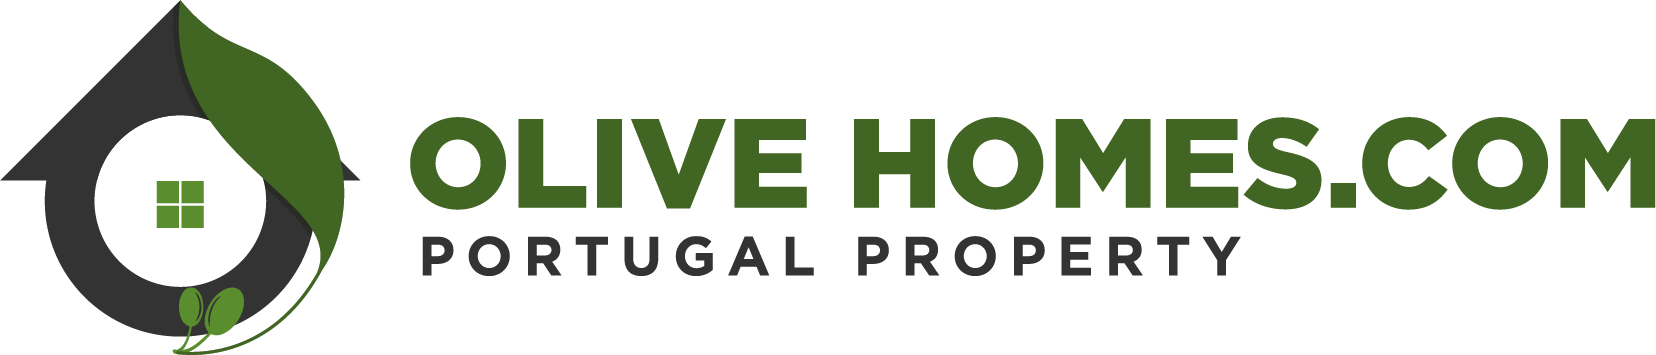 Olive Homes - A fresh perspective